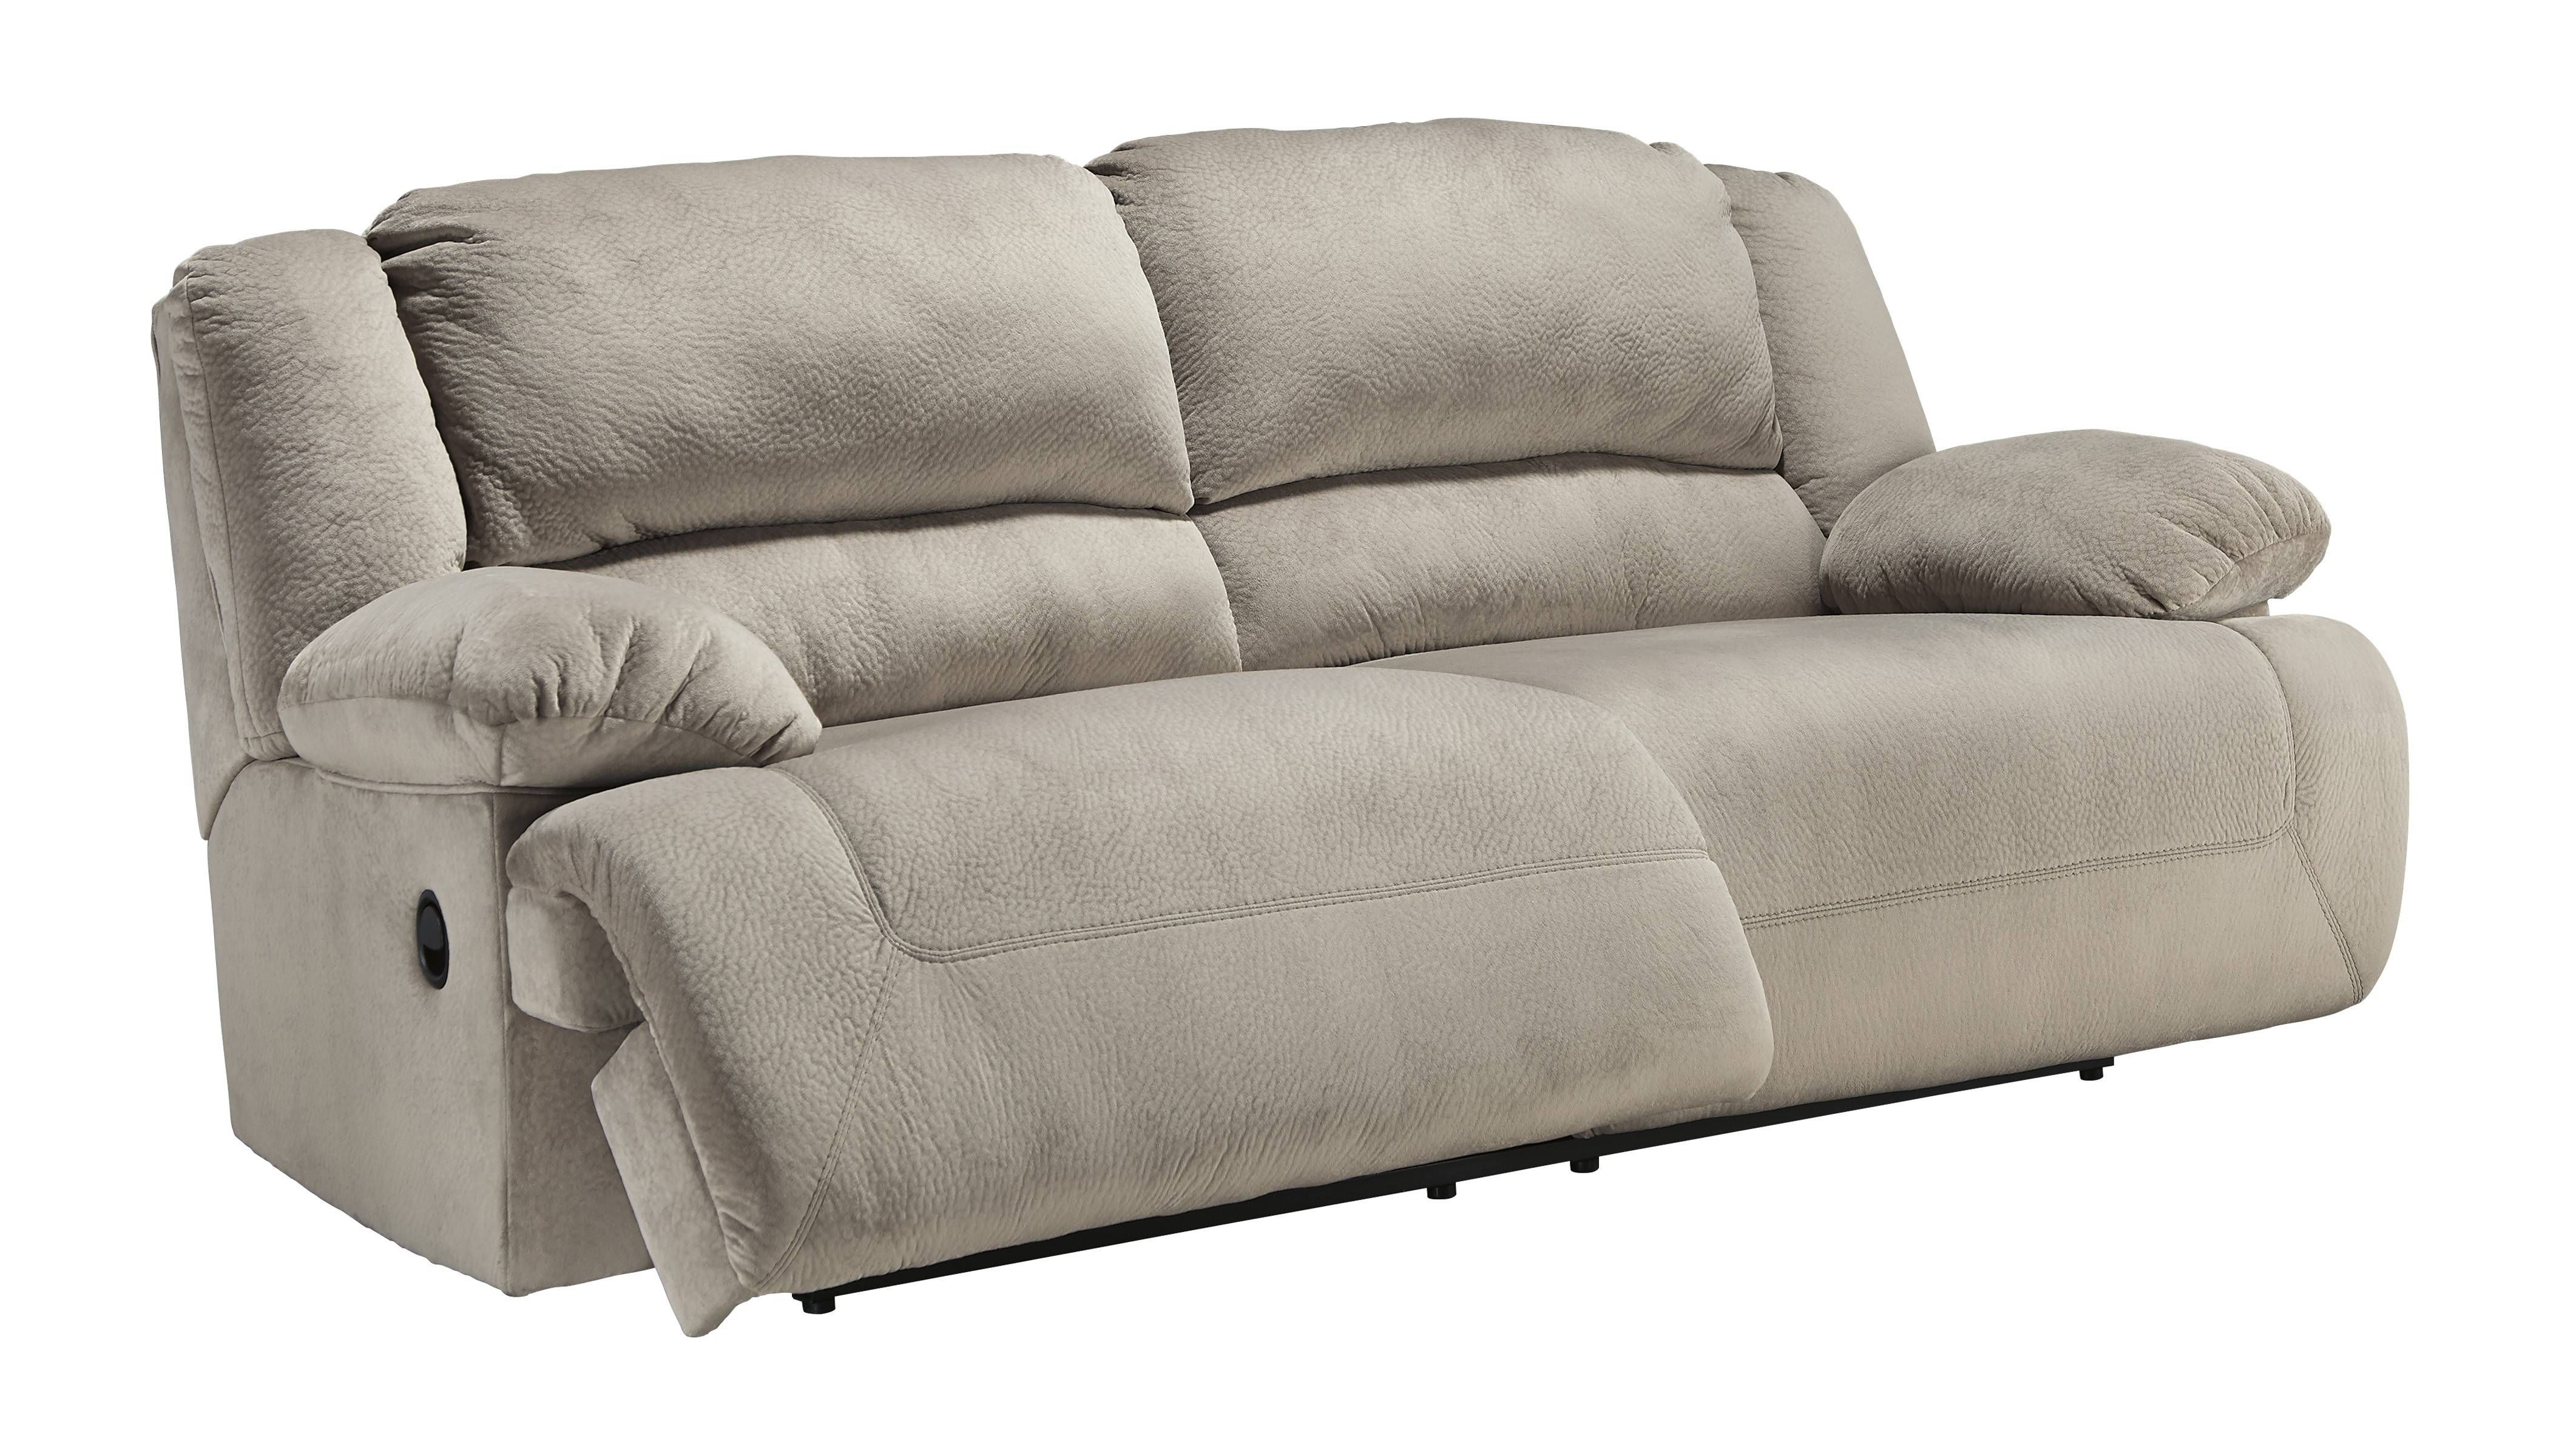 Buy Ashley Furniture Toletta Granite Two Seat Reclining Sofa Within 2 Seat Recliner Sofas (View 28 of 30)